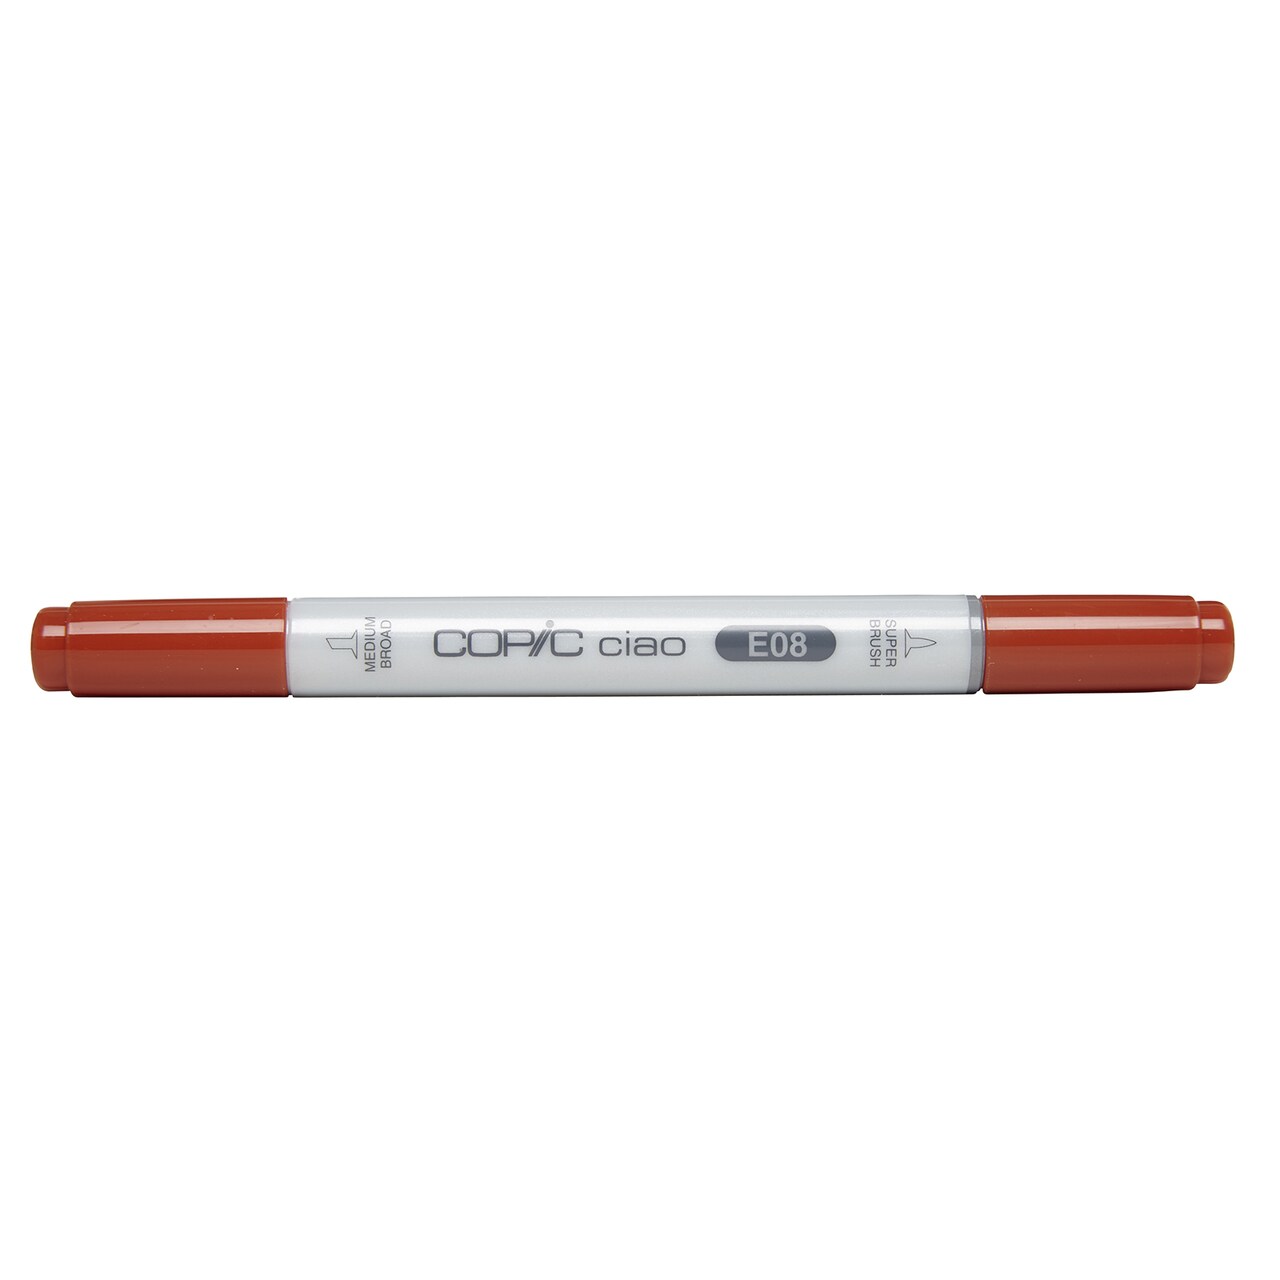 Copic Ciao Marker, Brown